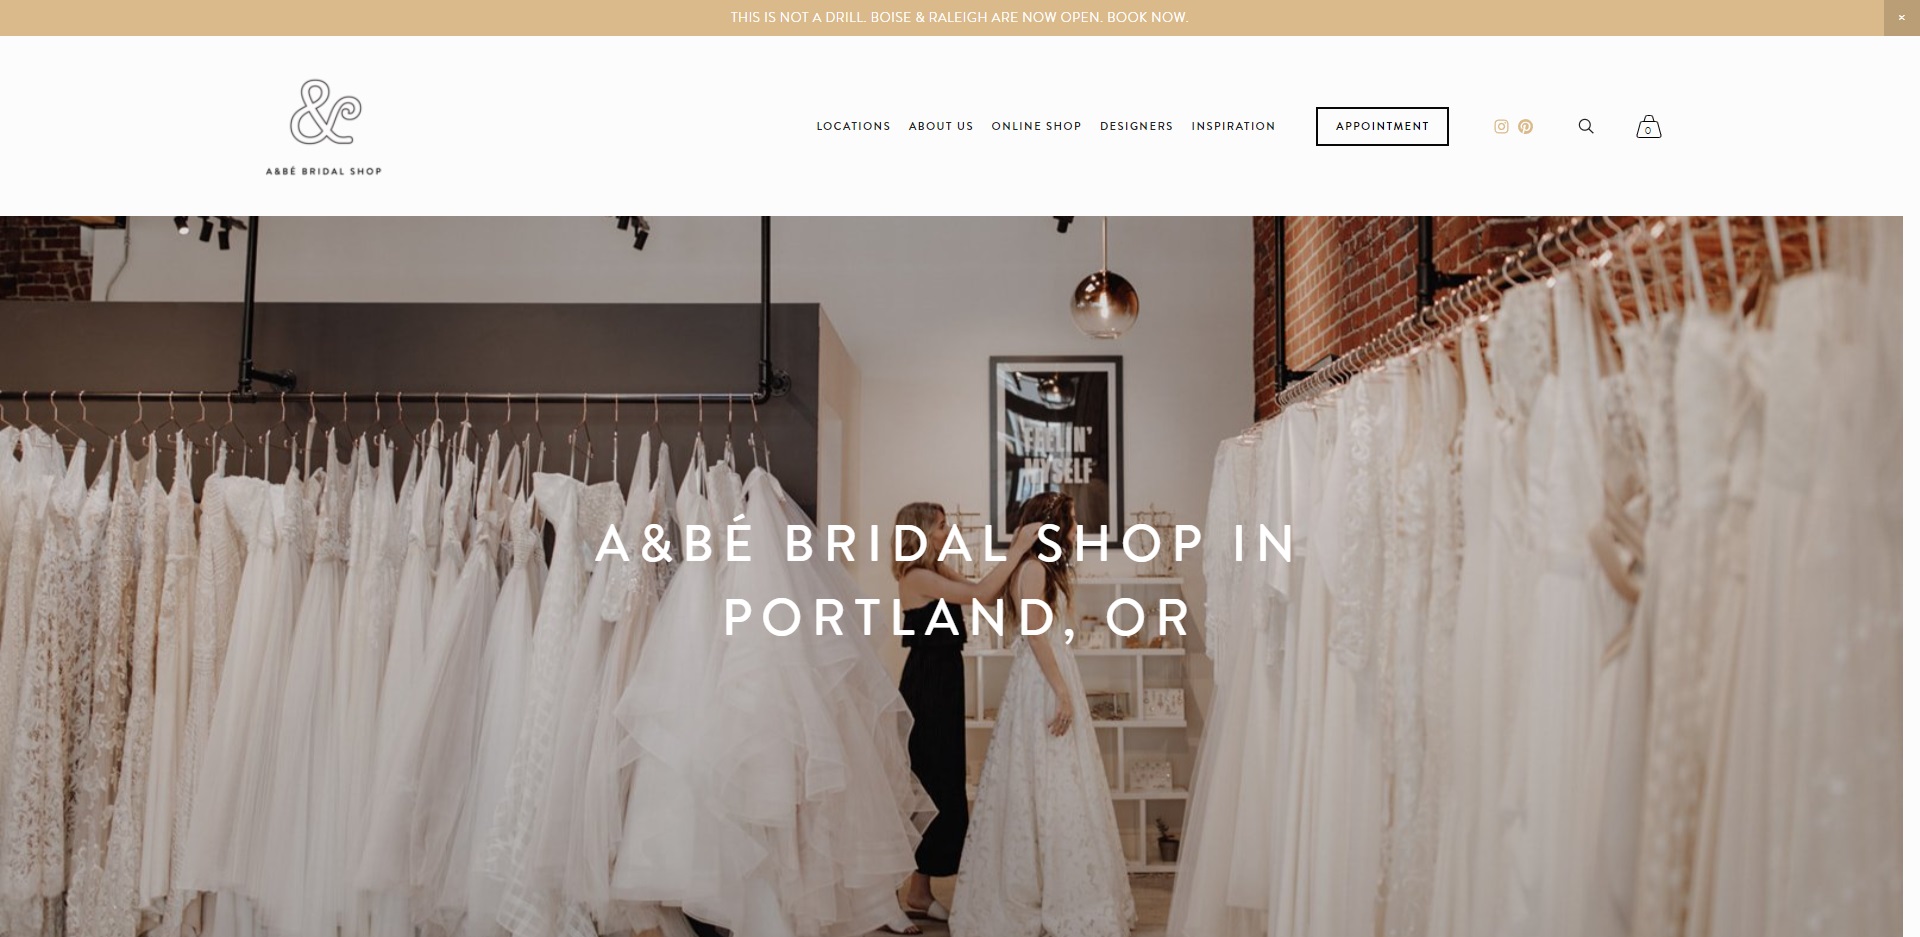 The Best Wedding Supplies Store in Portland, OR